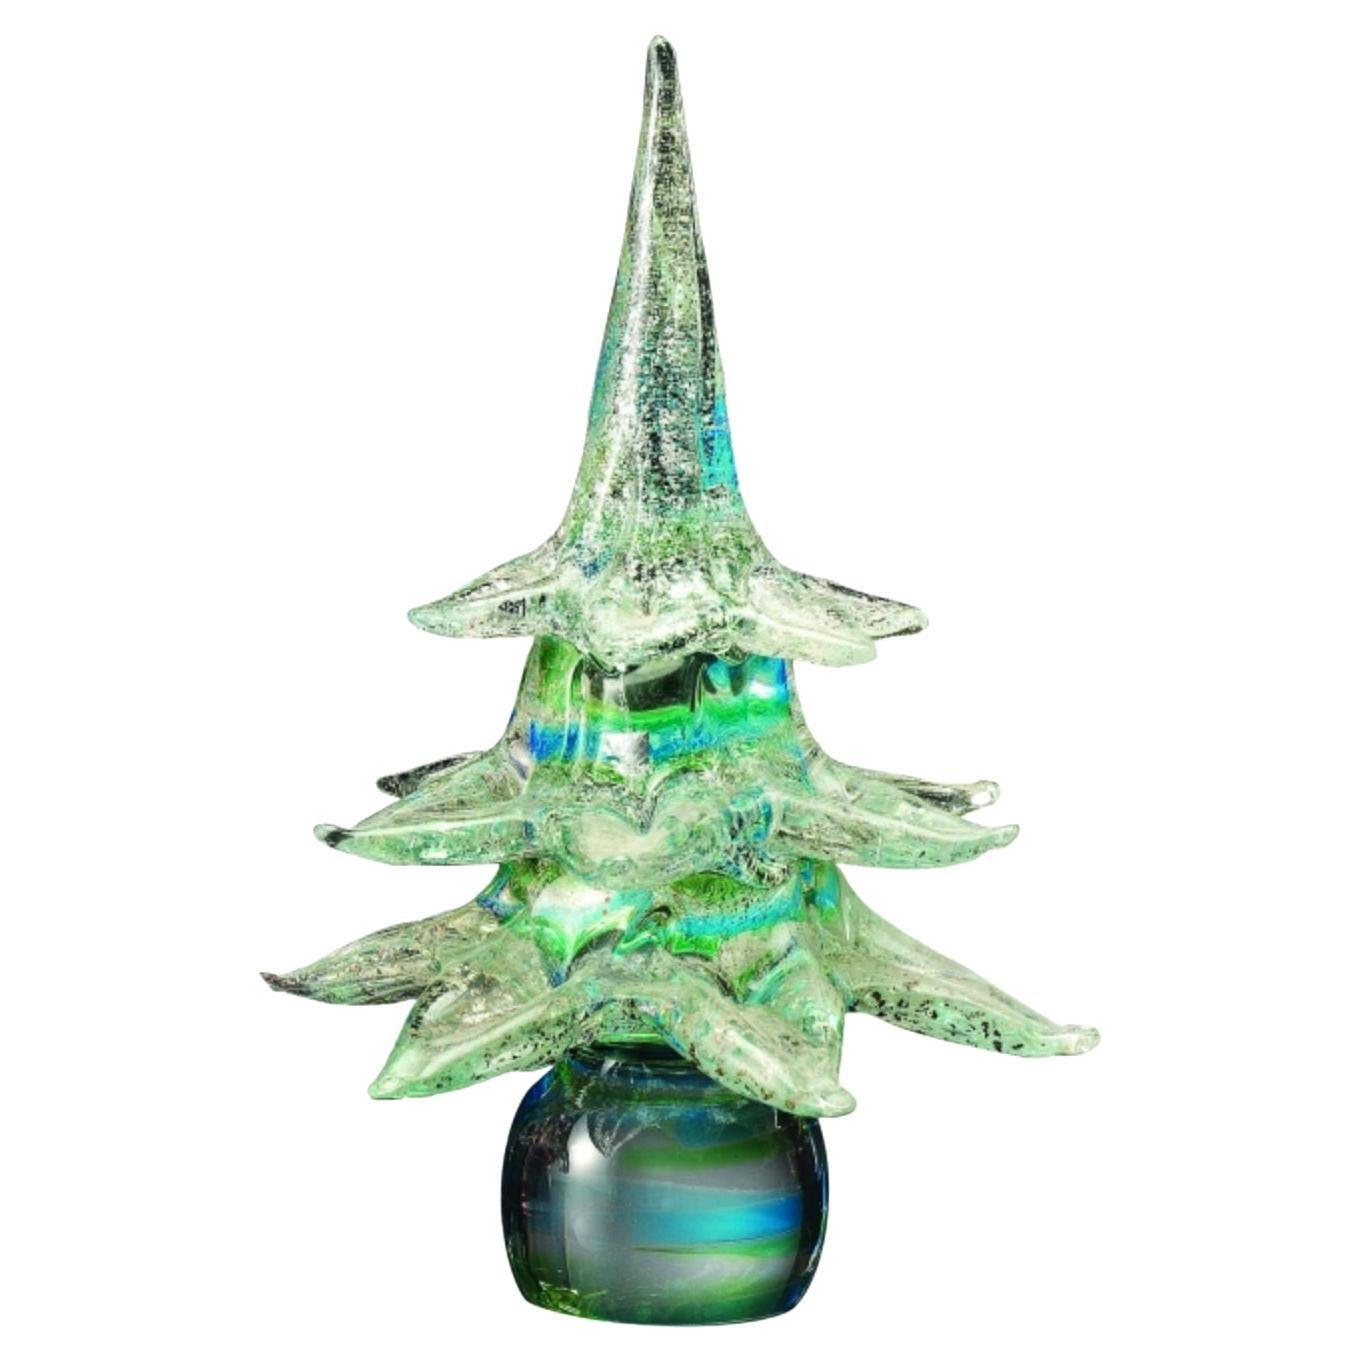 Christmas Tree Green Made in Artistic Blow Murano Glass